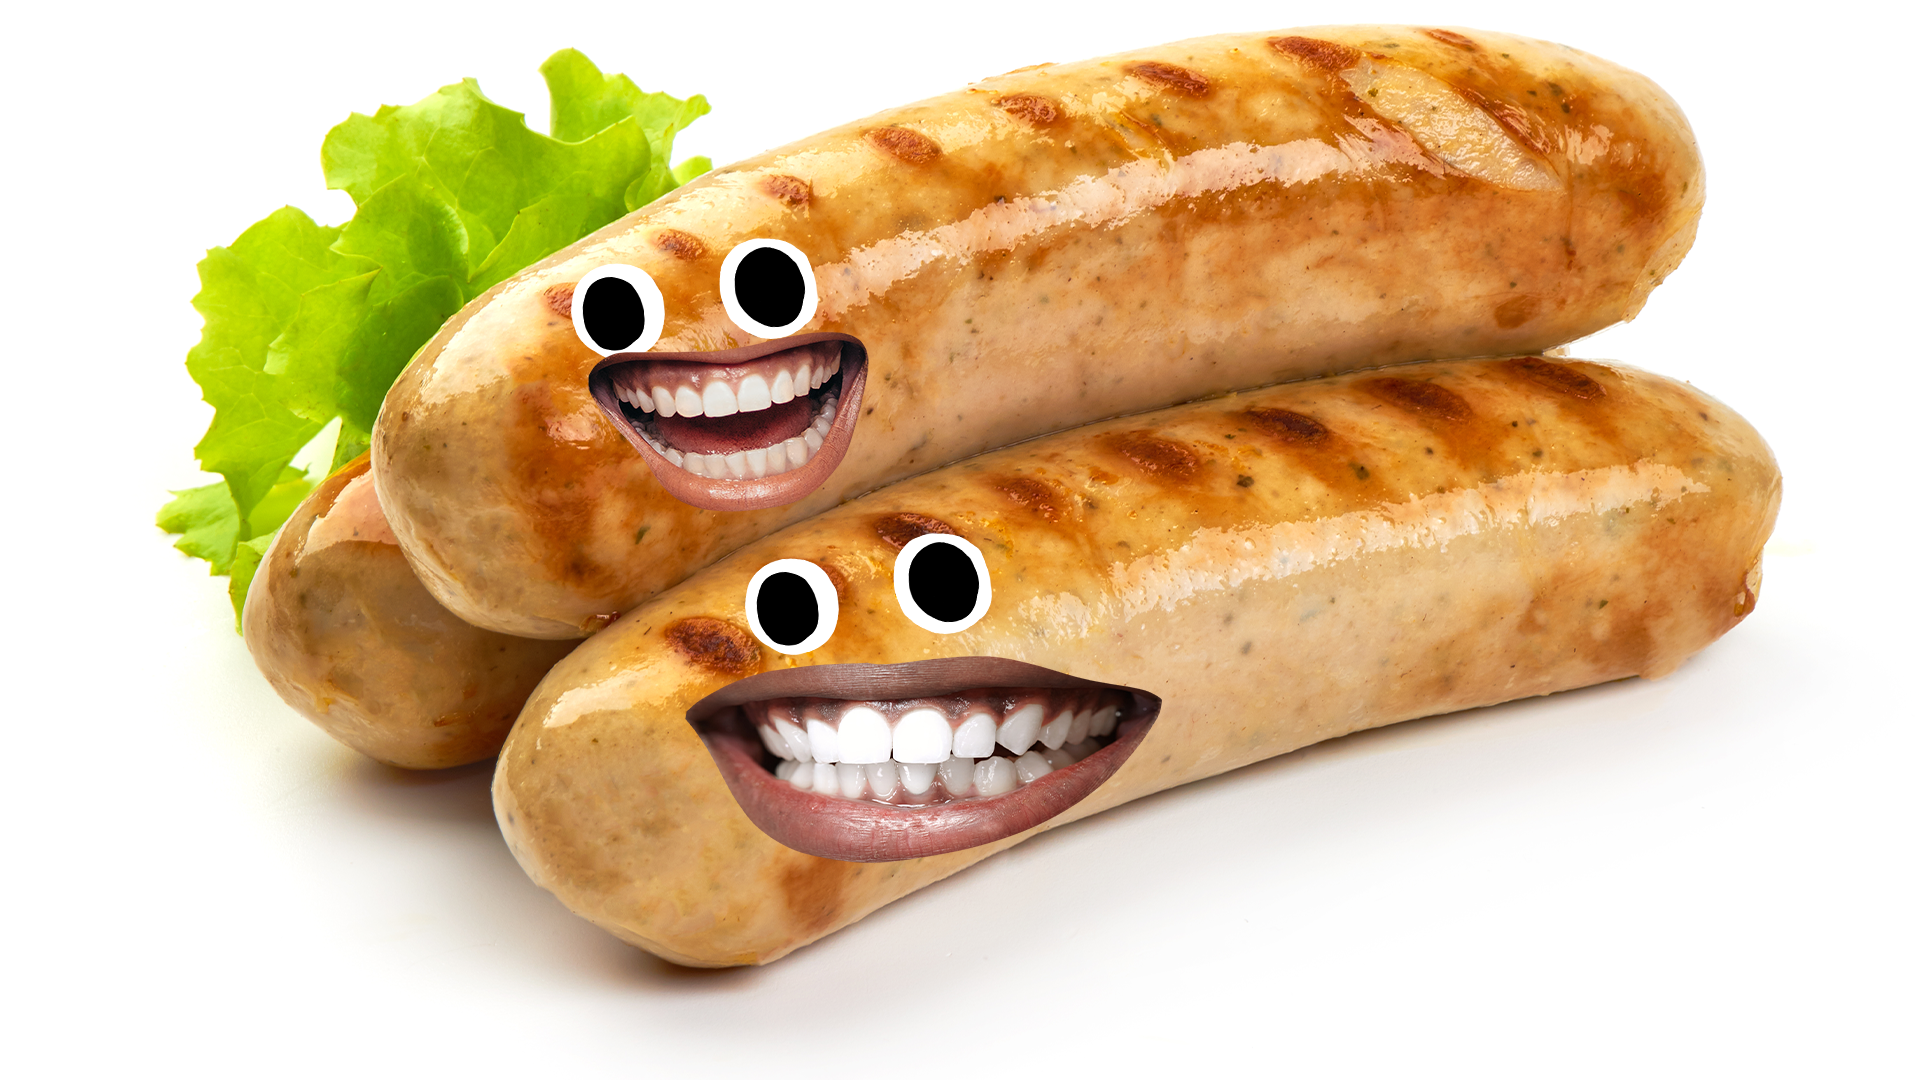 Pile of sausages with faces on white background